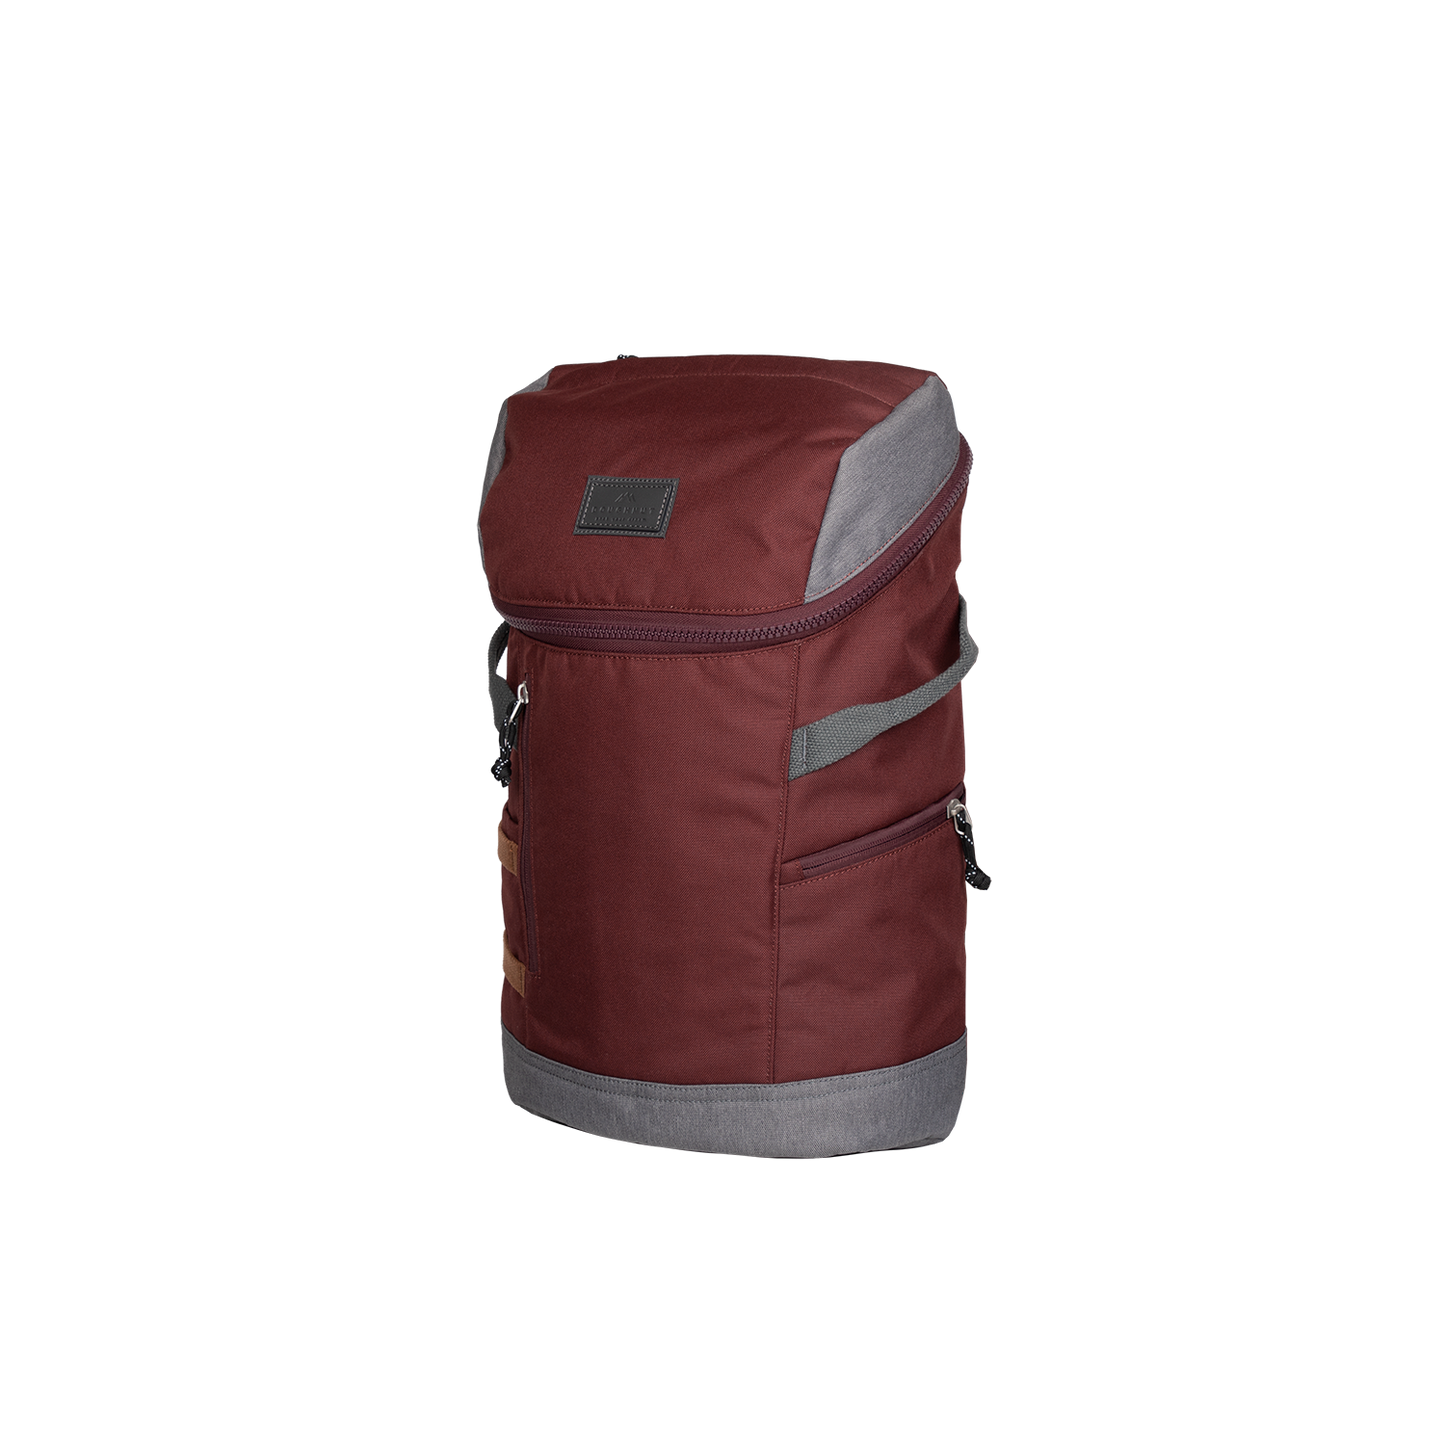 Giant Leap Backpack